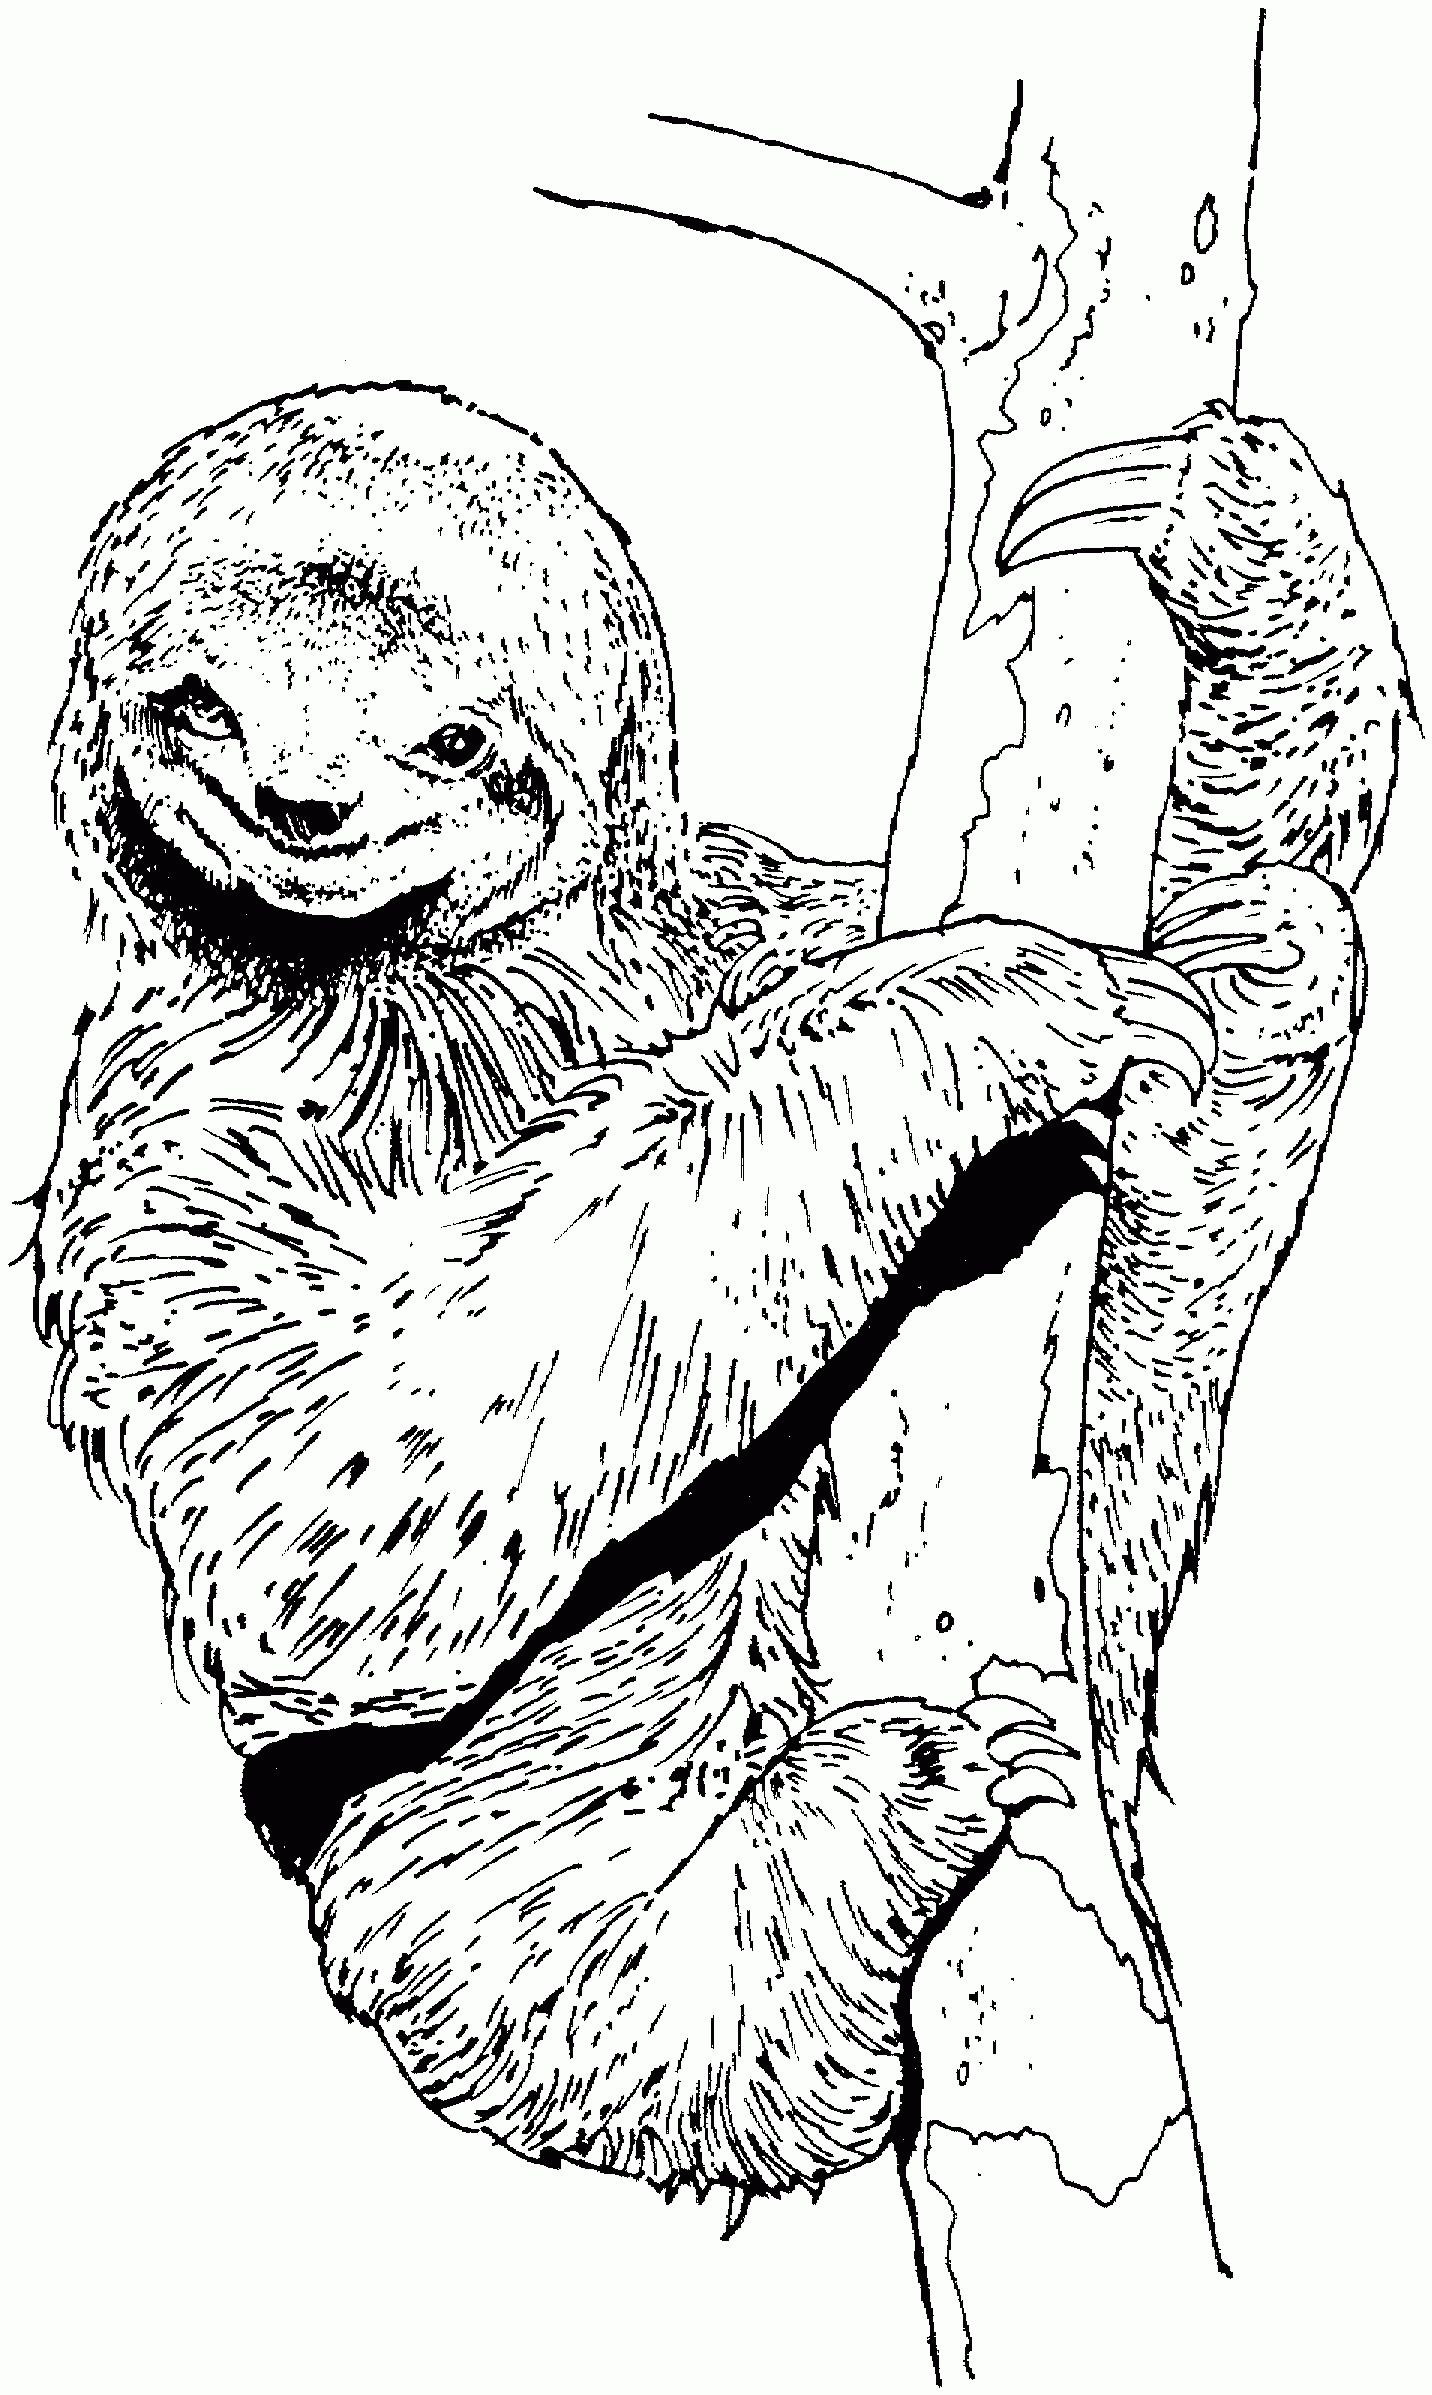 Free Sloth Coloring Pages